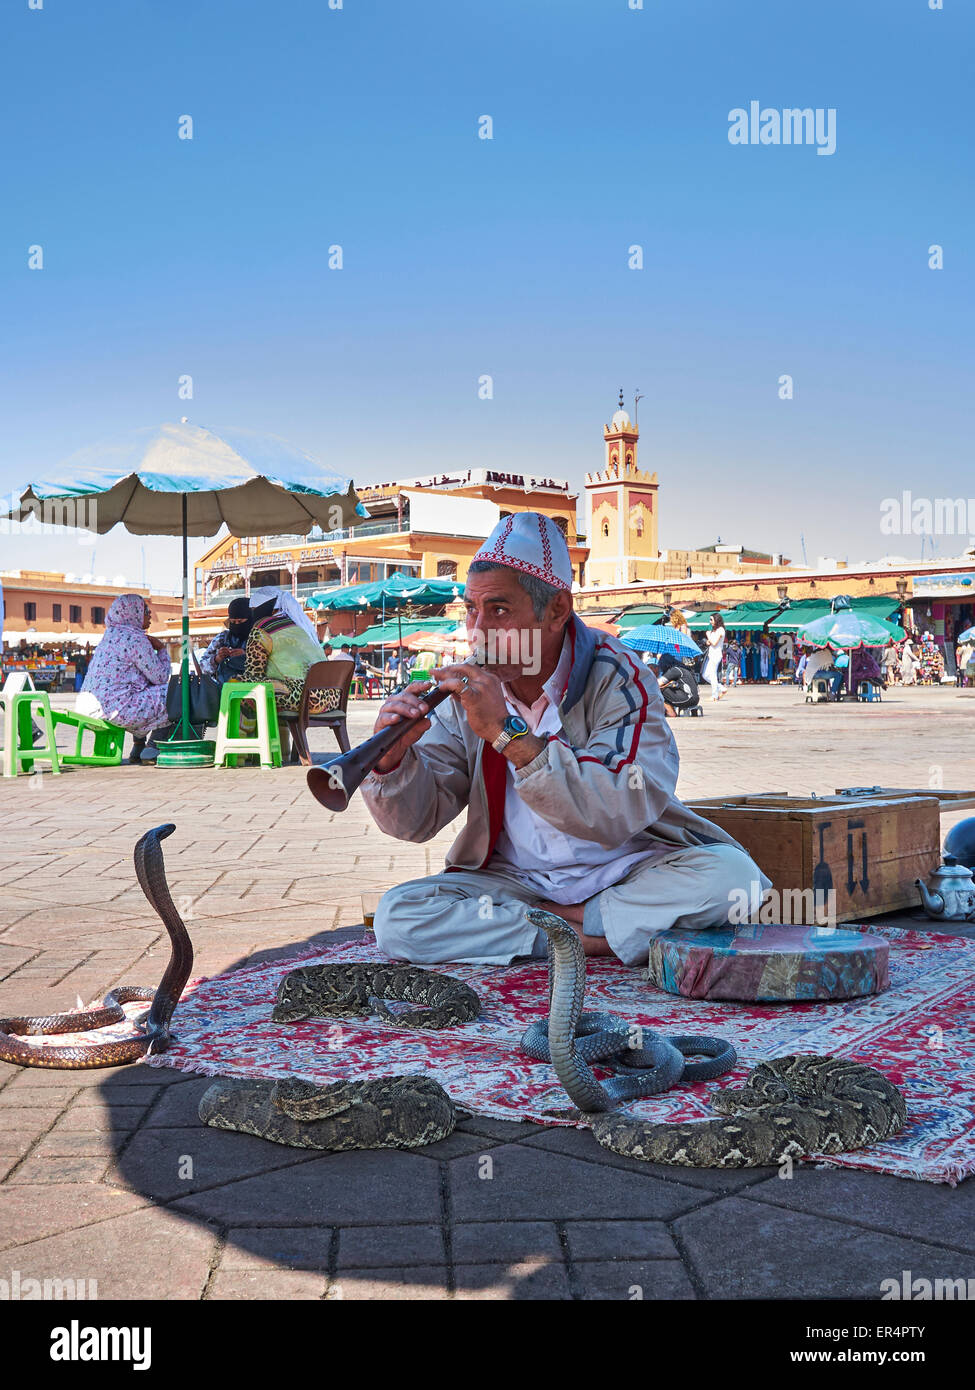 Snake Charmer in the 'Djeema el fnaa'  - The very busy Marrakech market square Stock Photo